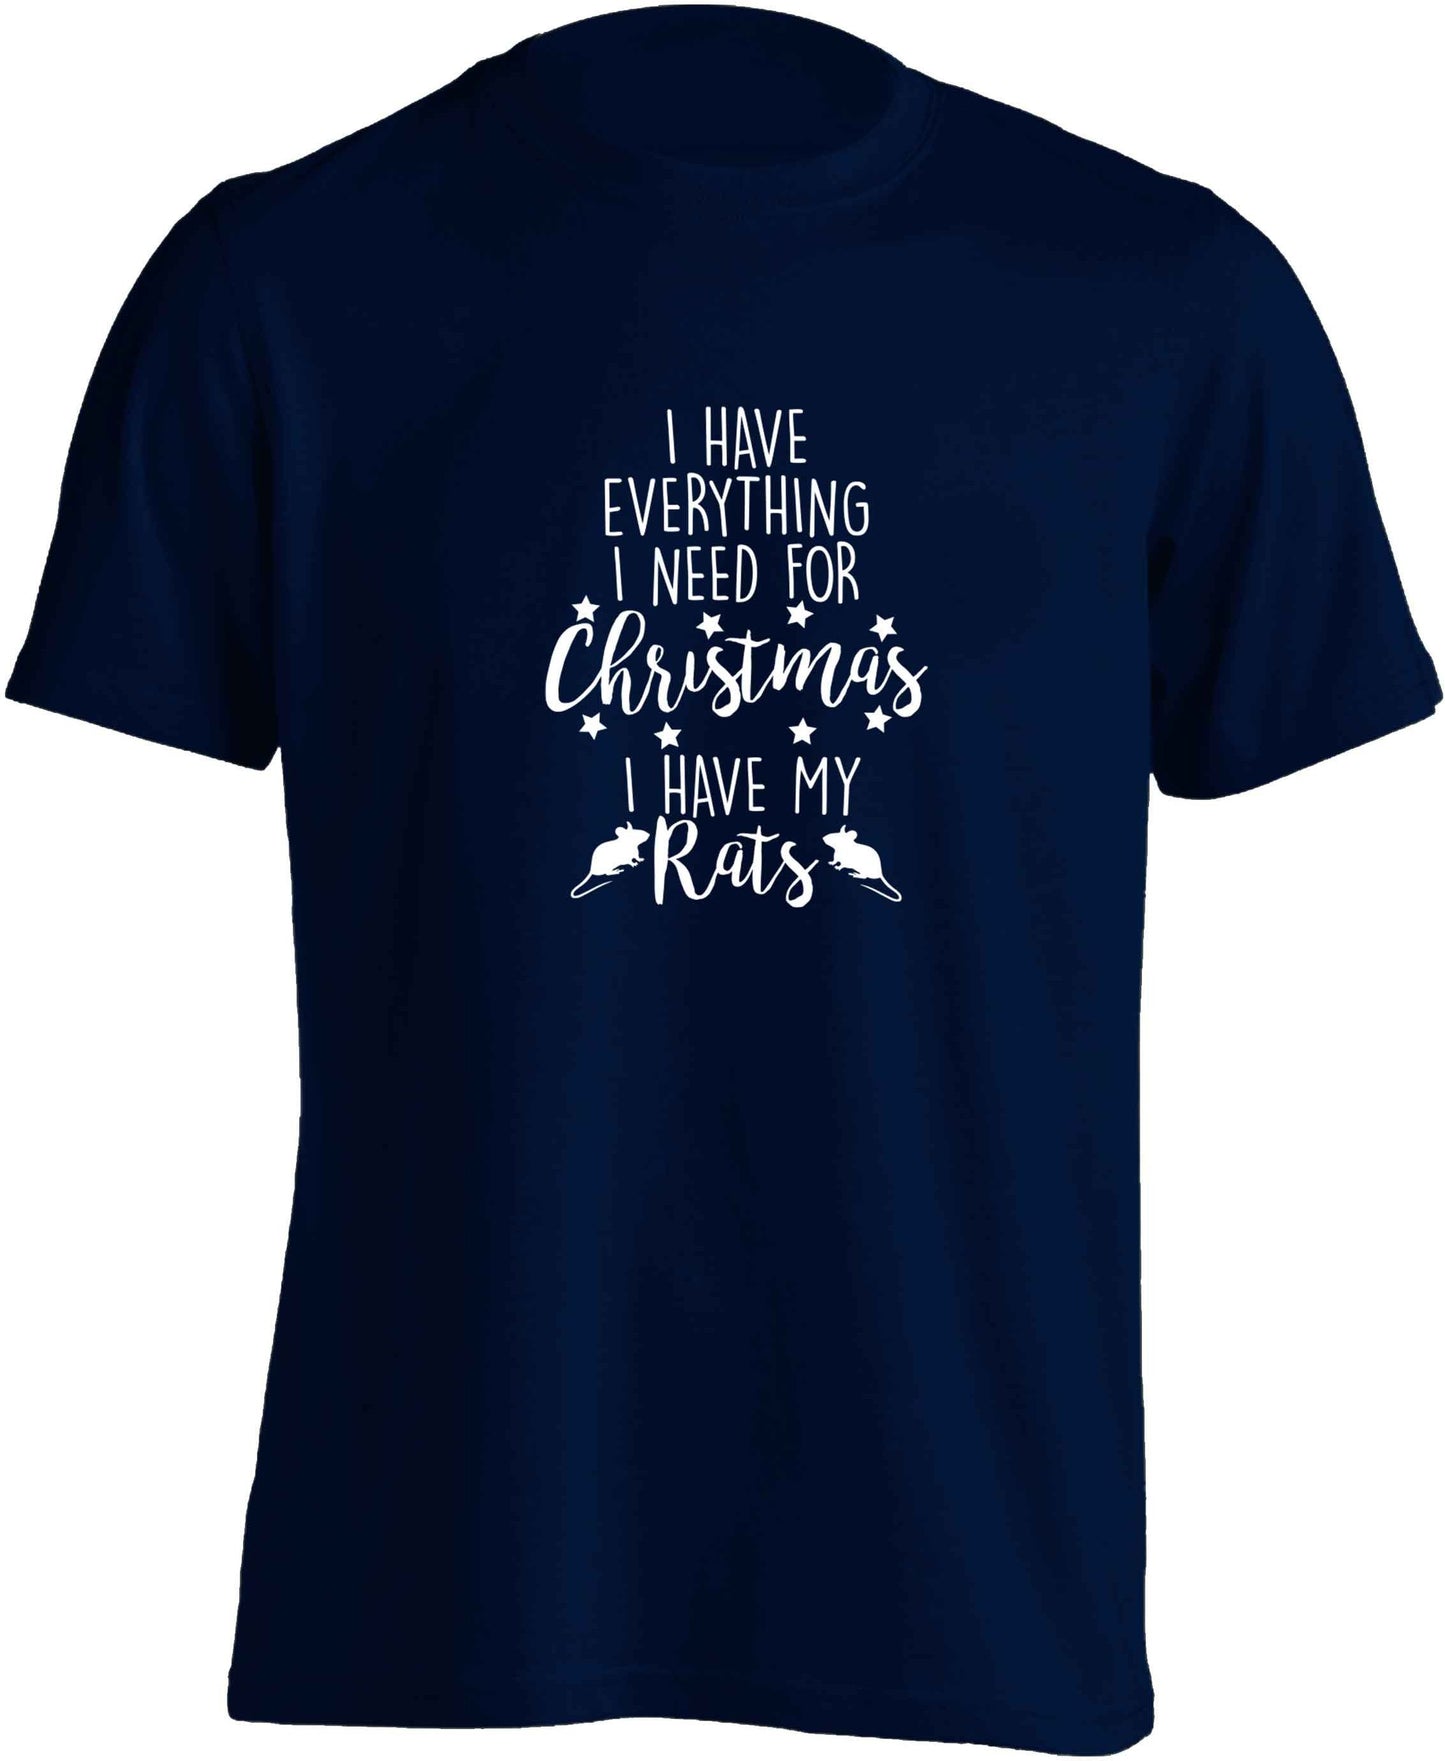 I have everything I need for Christmas I have my rats adults unisex navy Tshirt 2XL